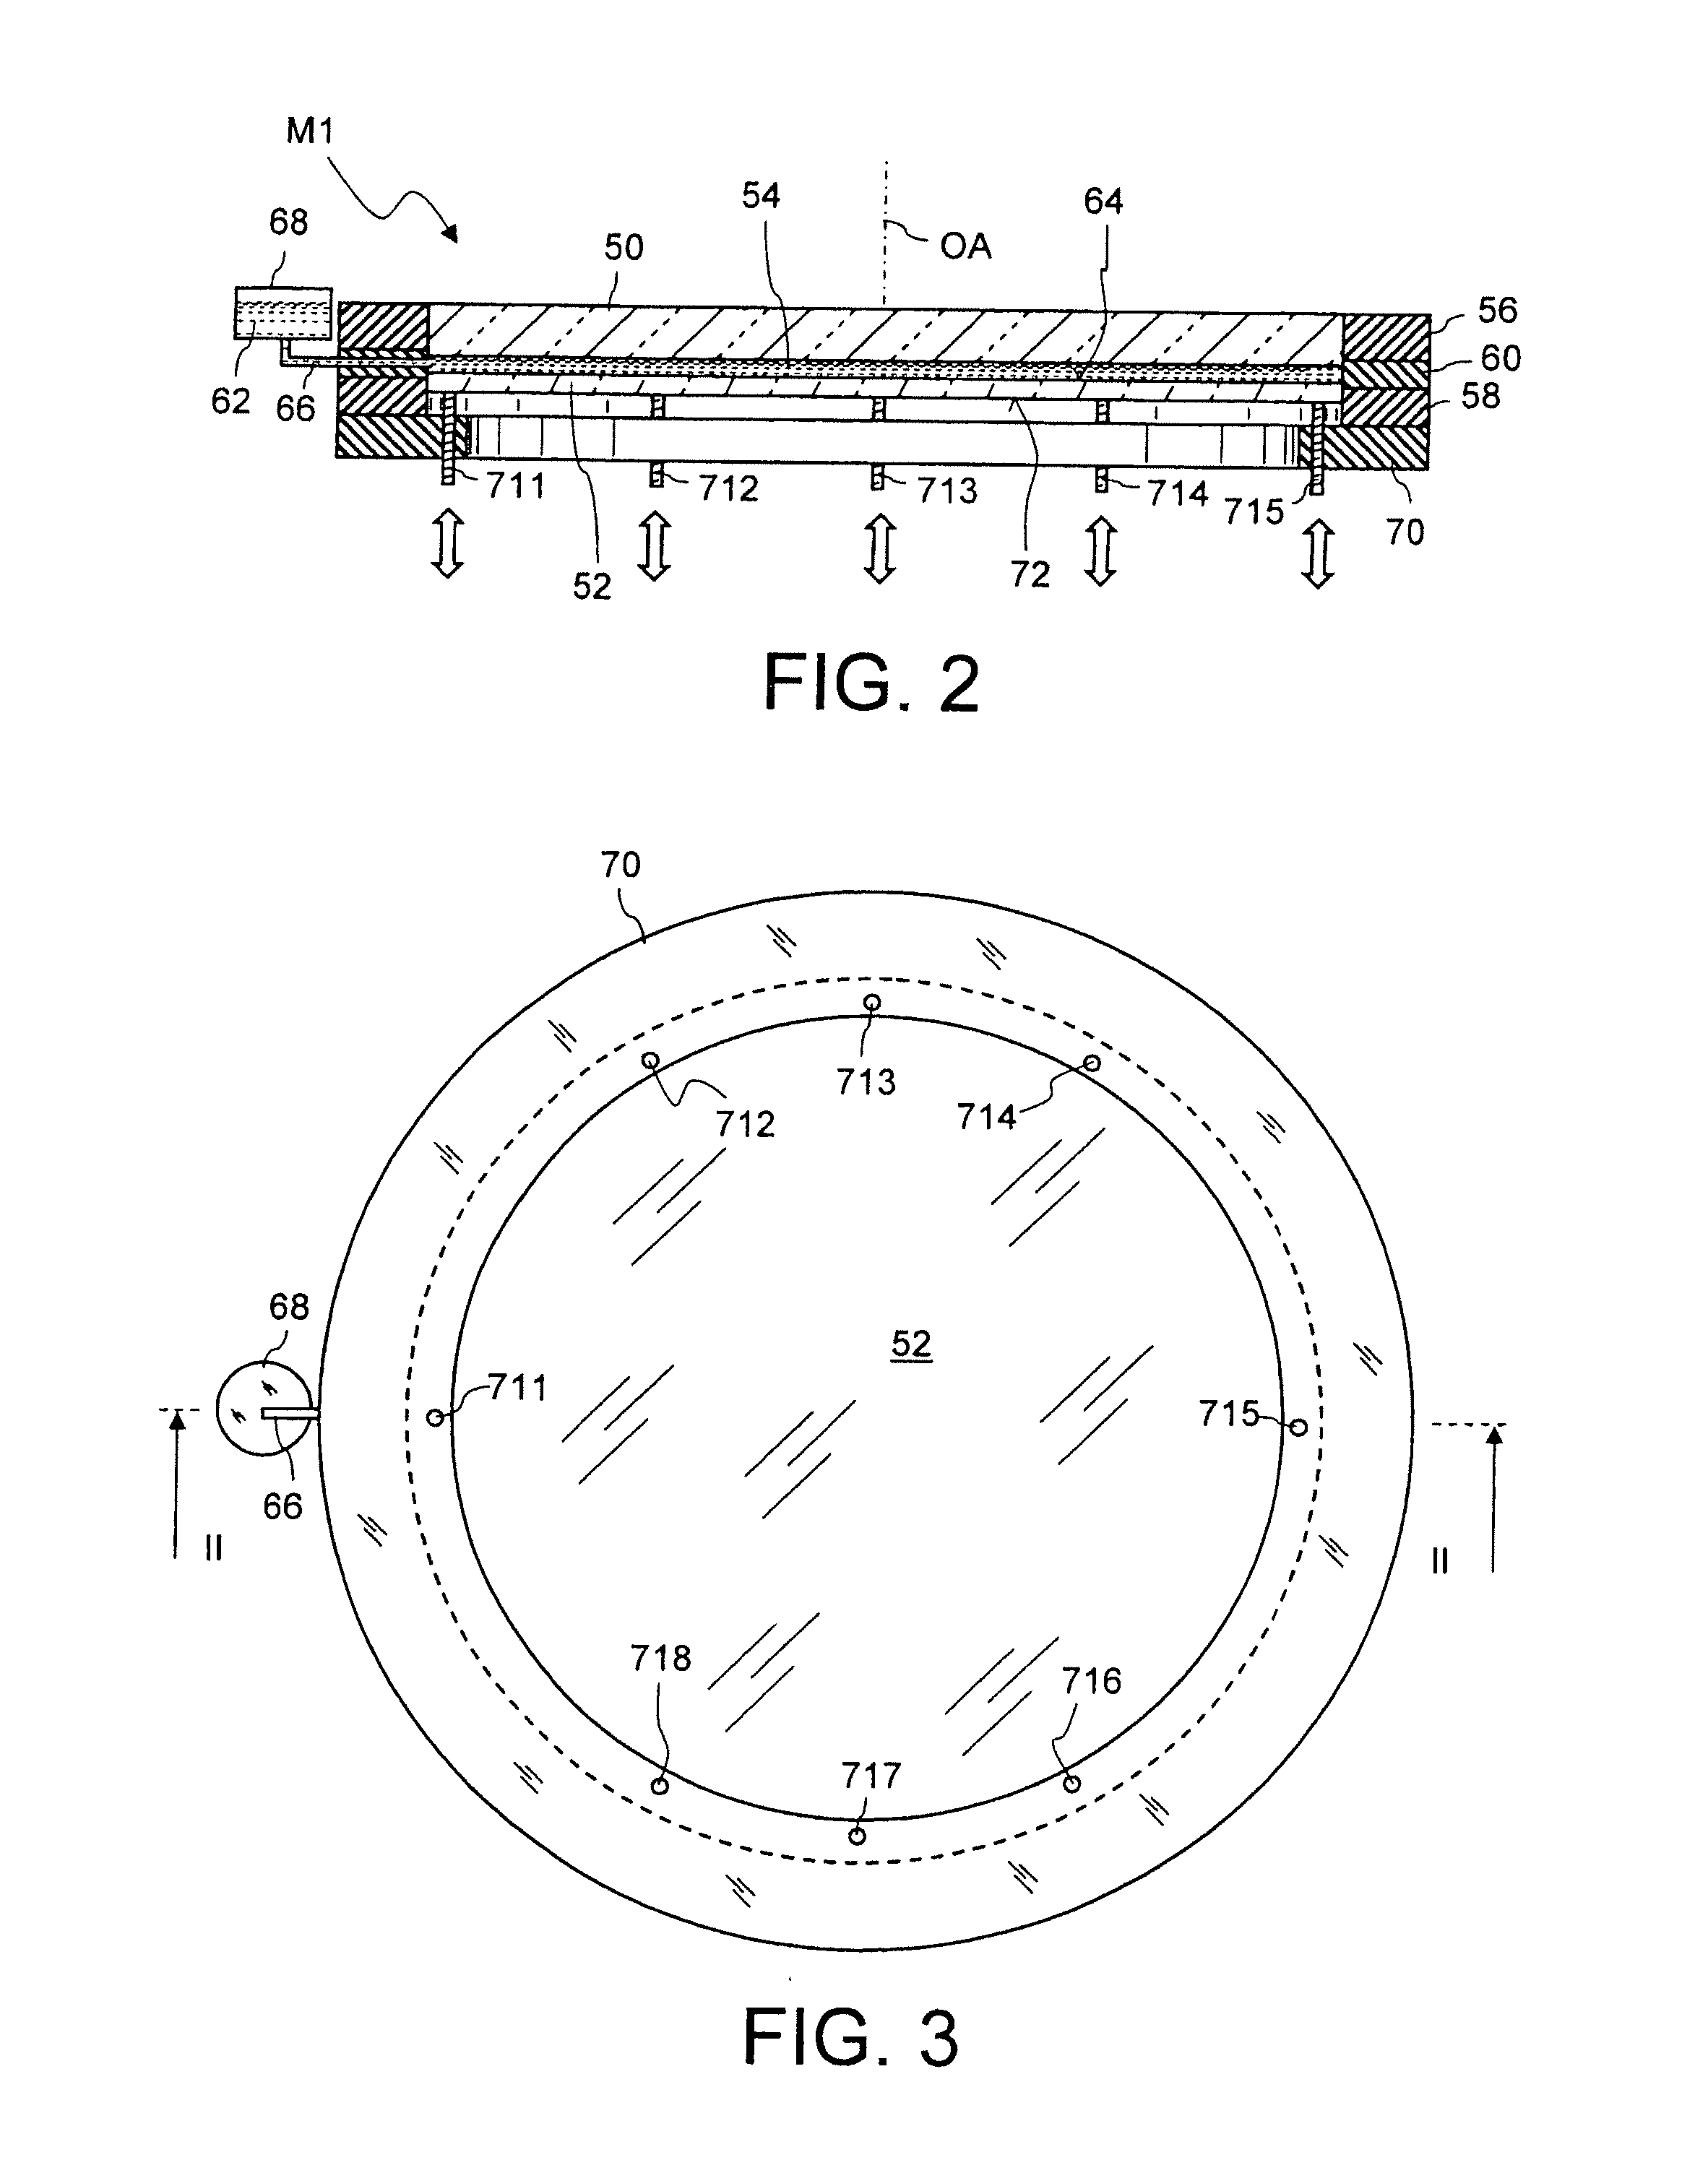 Projection objective of a microlithographic projection exposure apparatus